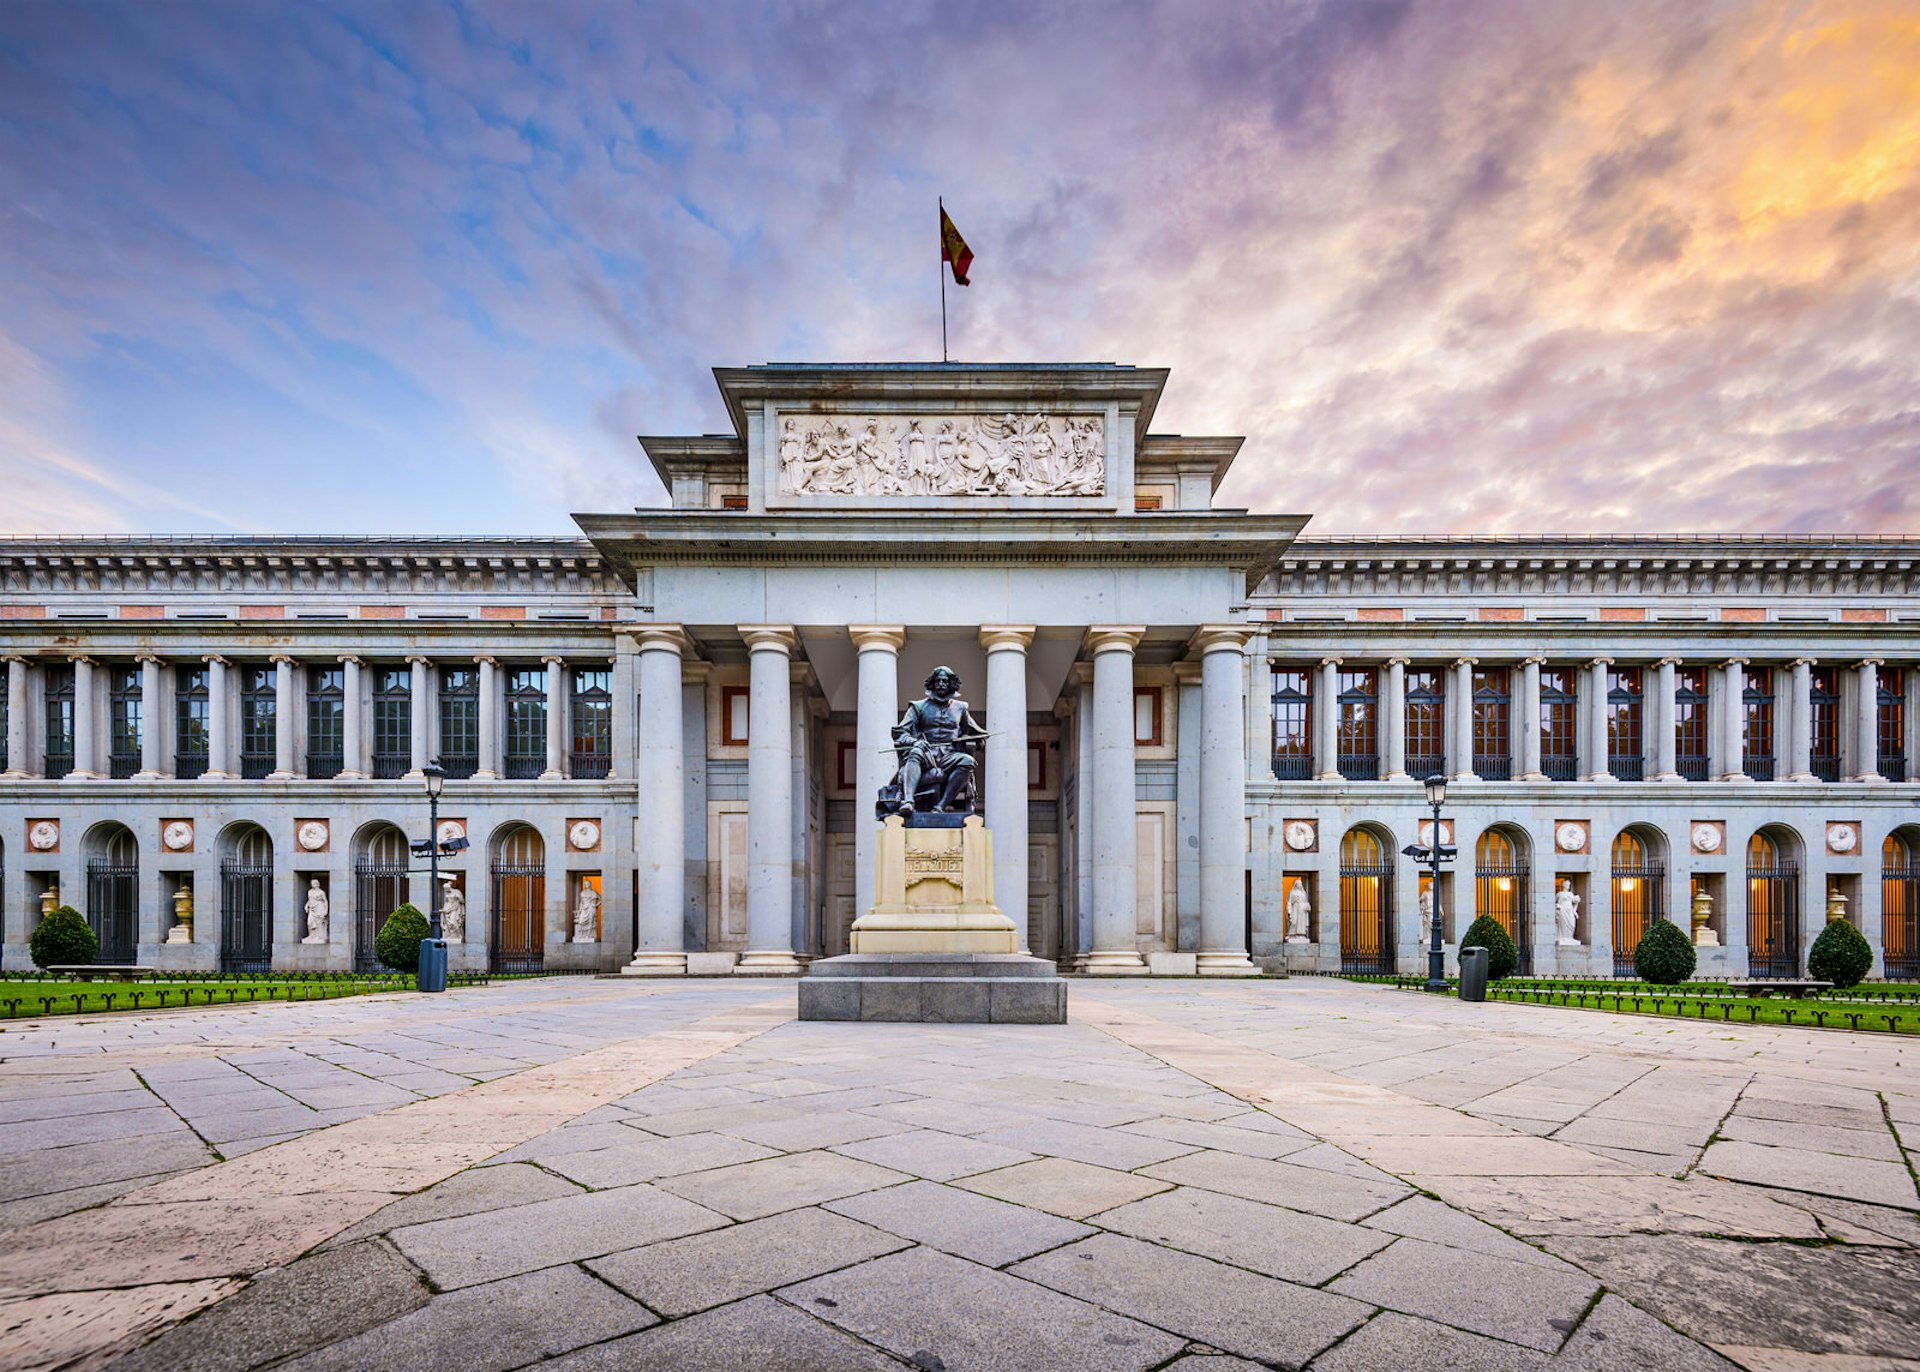 The Prado Museum is considered one of the world's finest collections of European art © Sean Pavone / Shutterstock